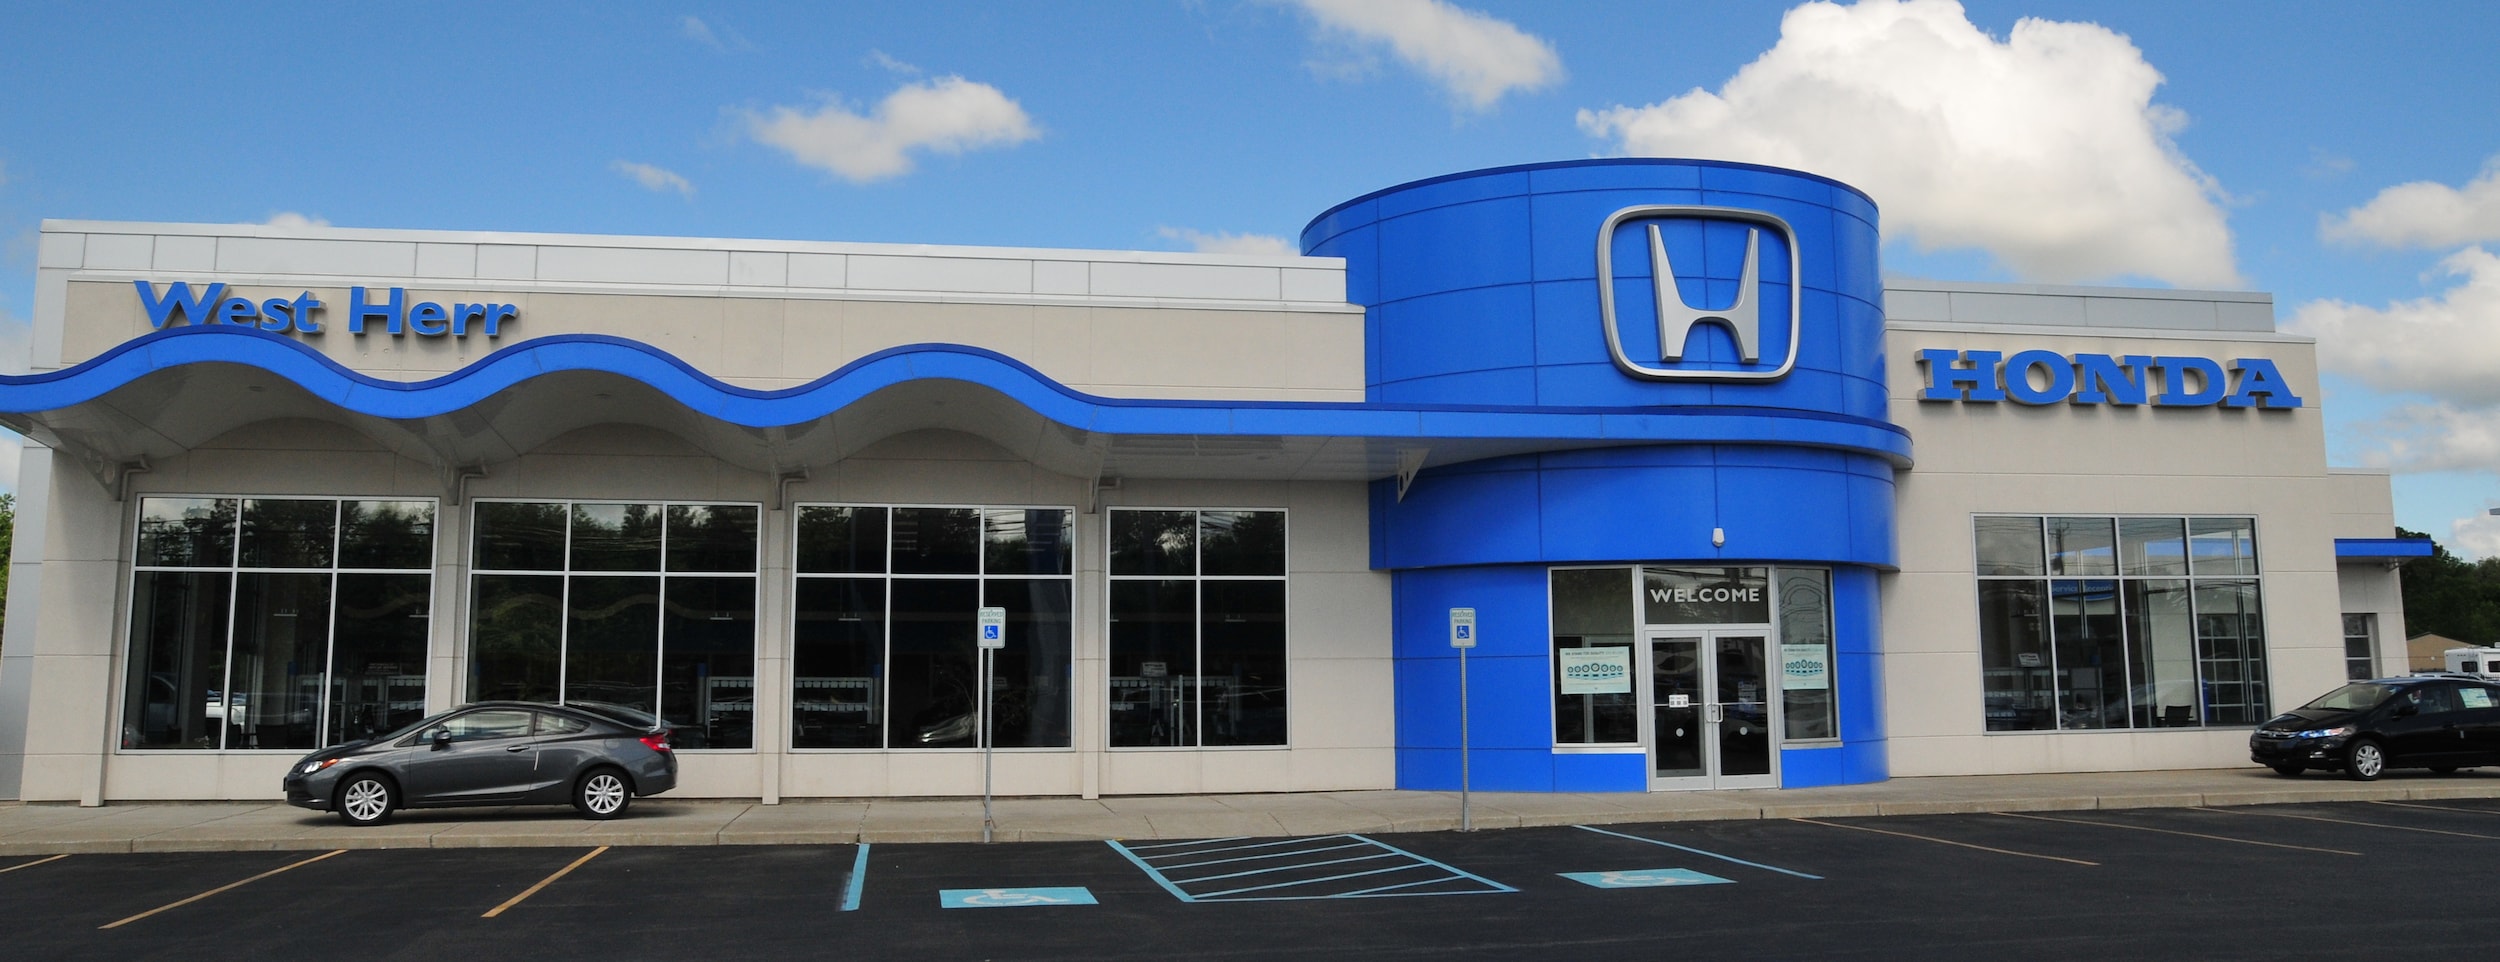 About Us | West Herr Honda | Serving Buffalo, Amherst, & Rochester, NY